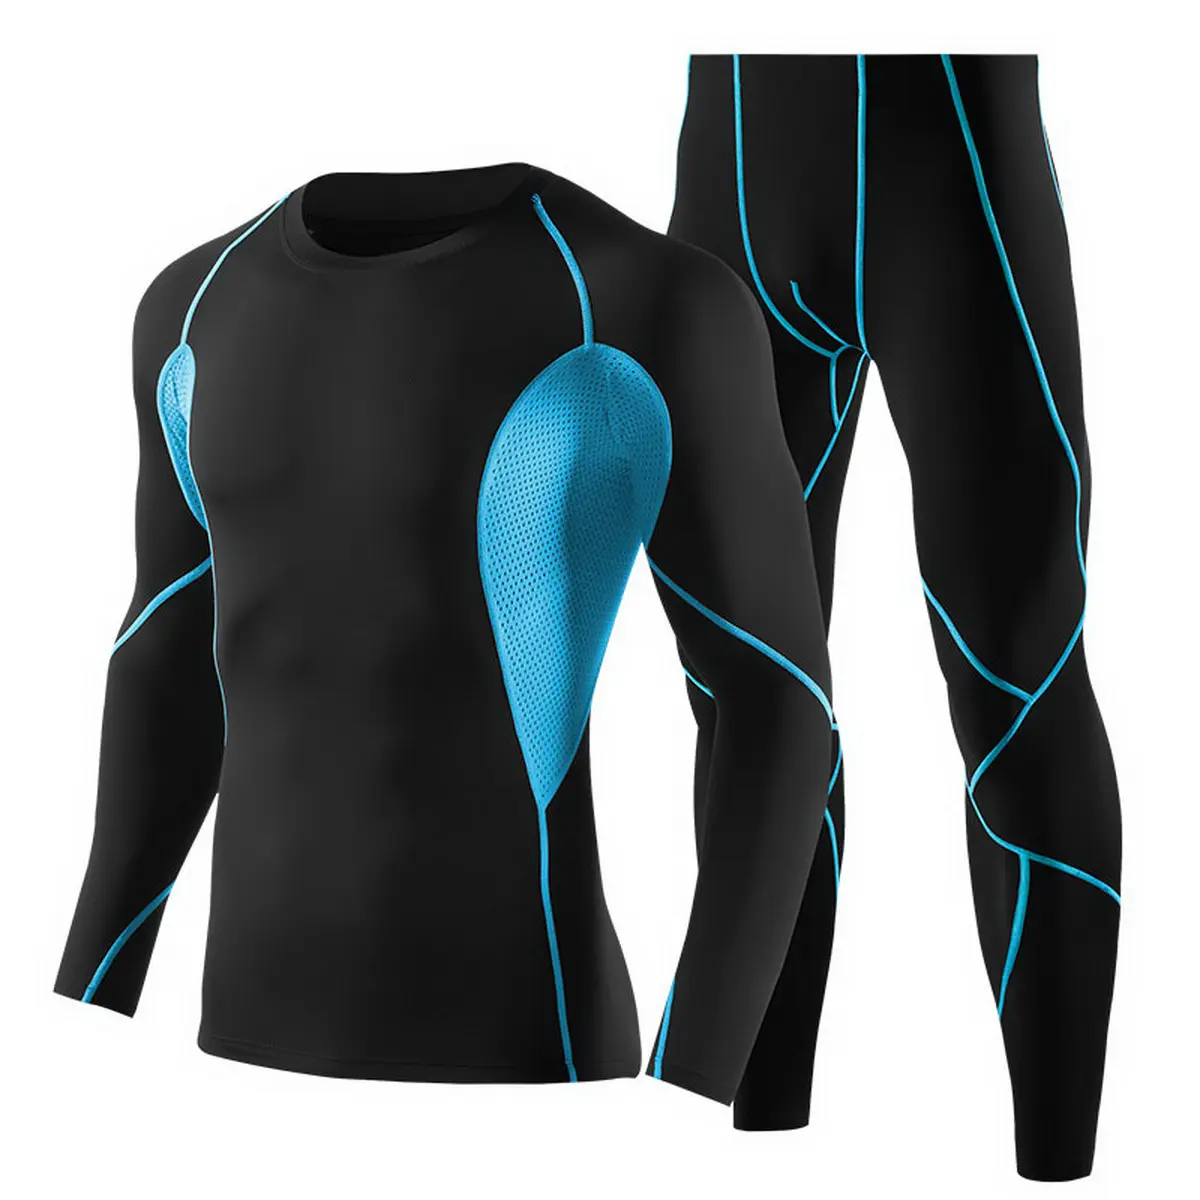 Fitness Clothing Men's Quick Dry Suit Top Long Sleeve Sportswear Bodysuit Clothes Gym for Men